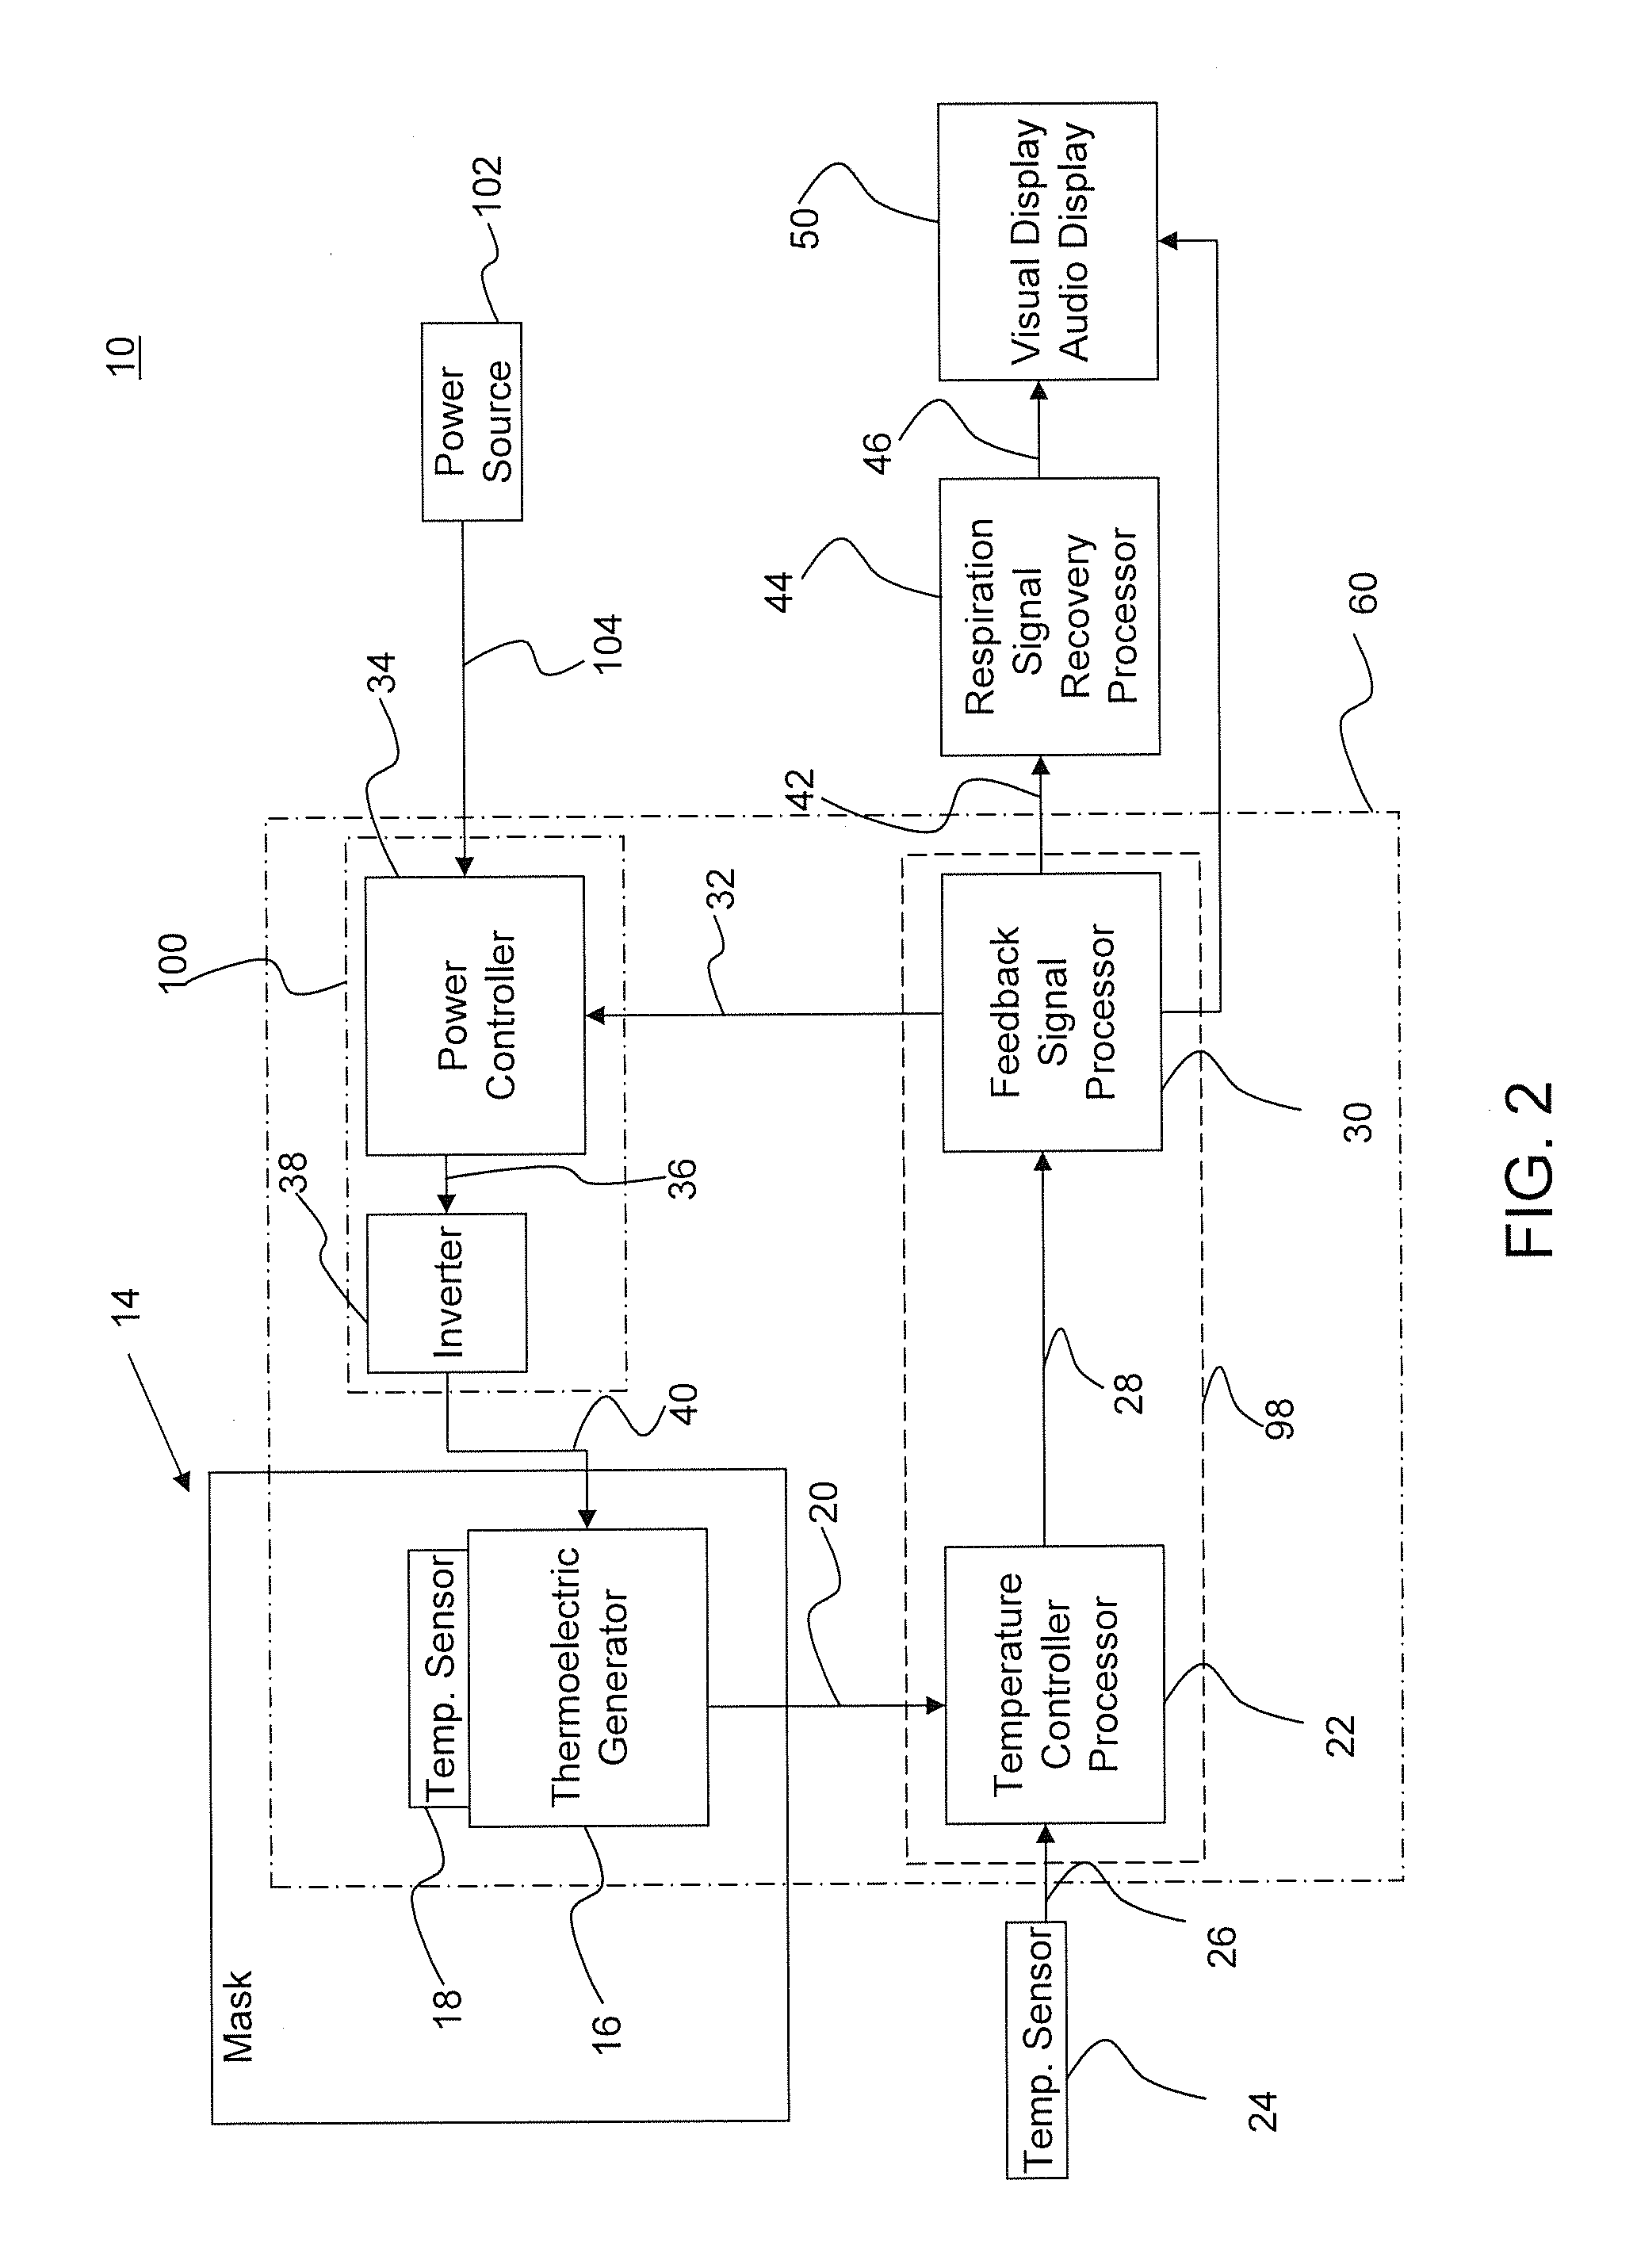 Respiration monitoring system and method